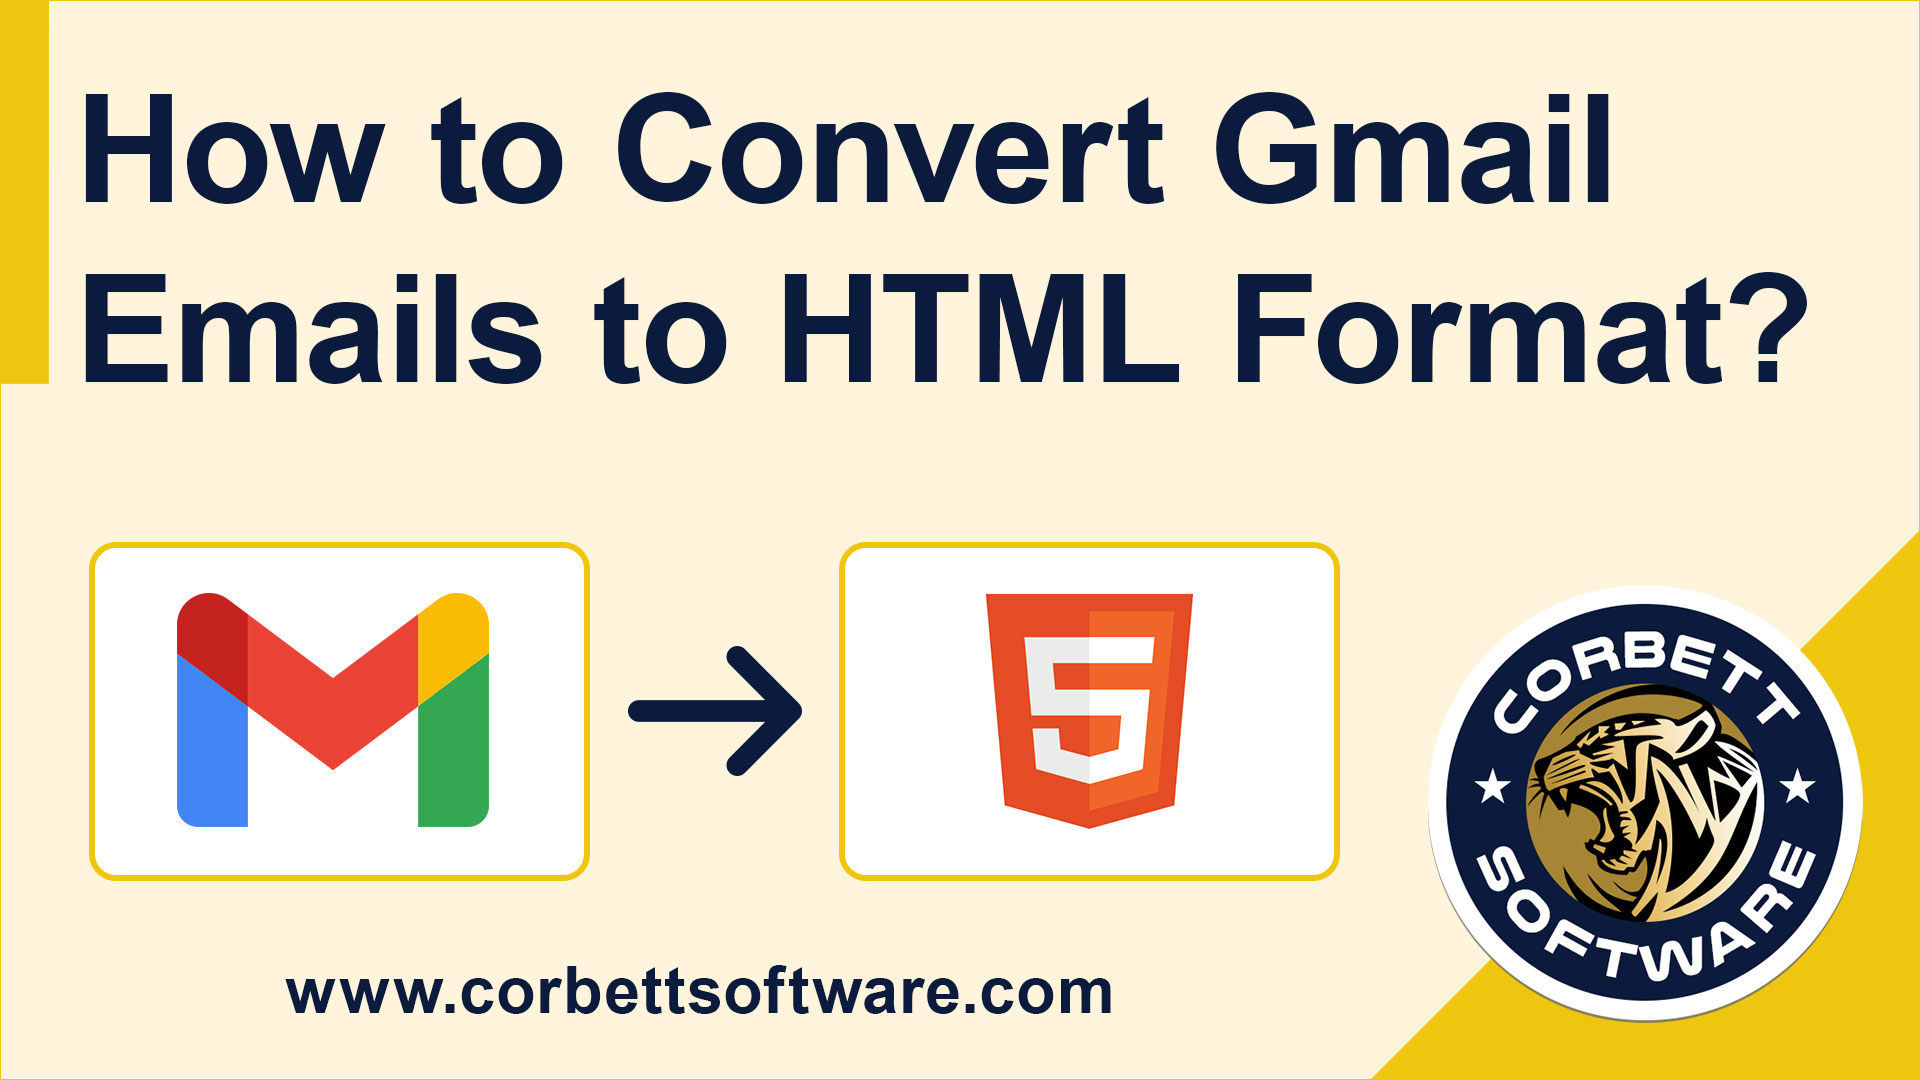 Convert Gmail to HTML